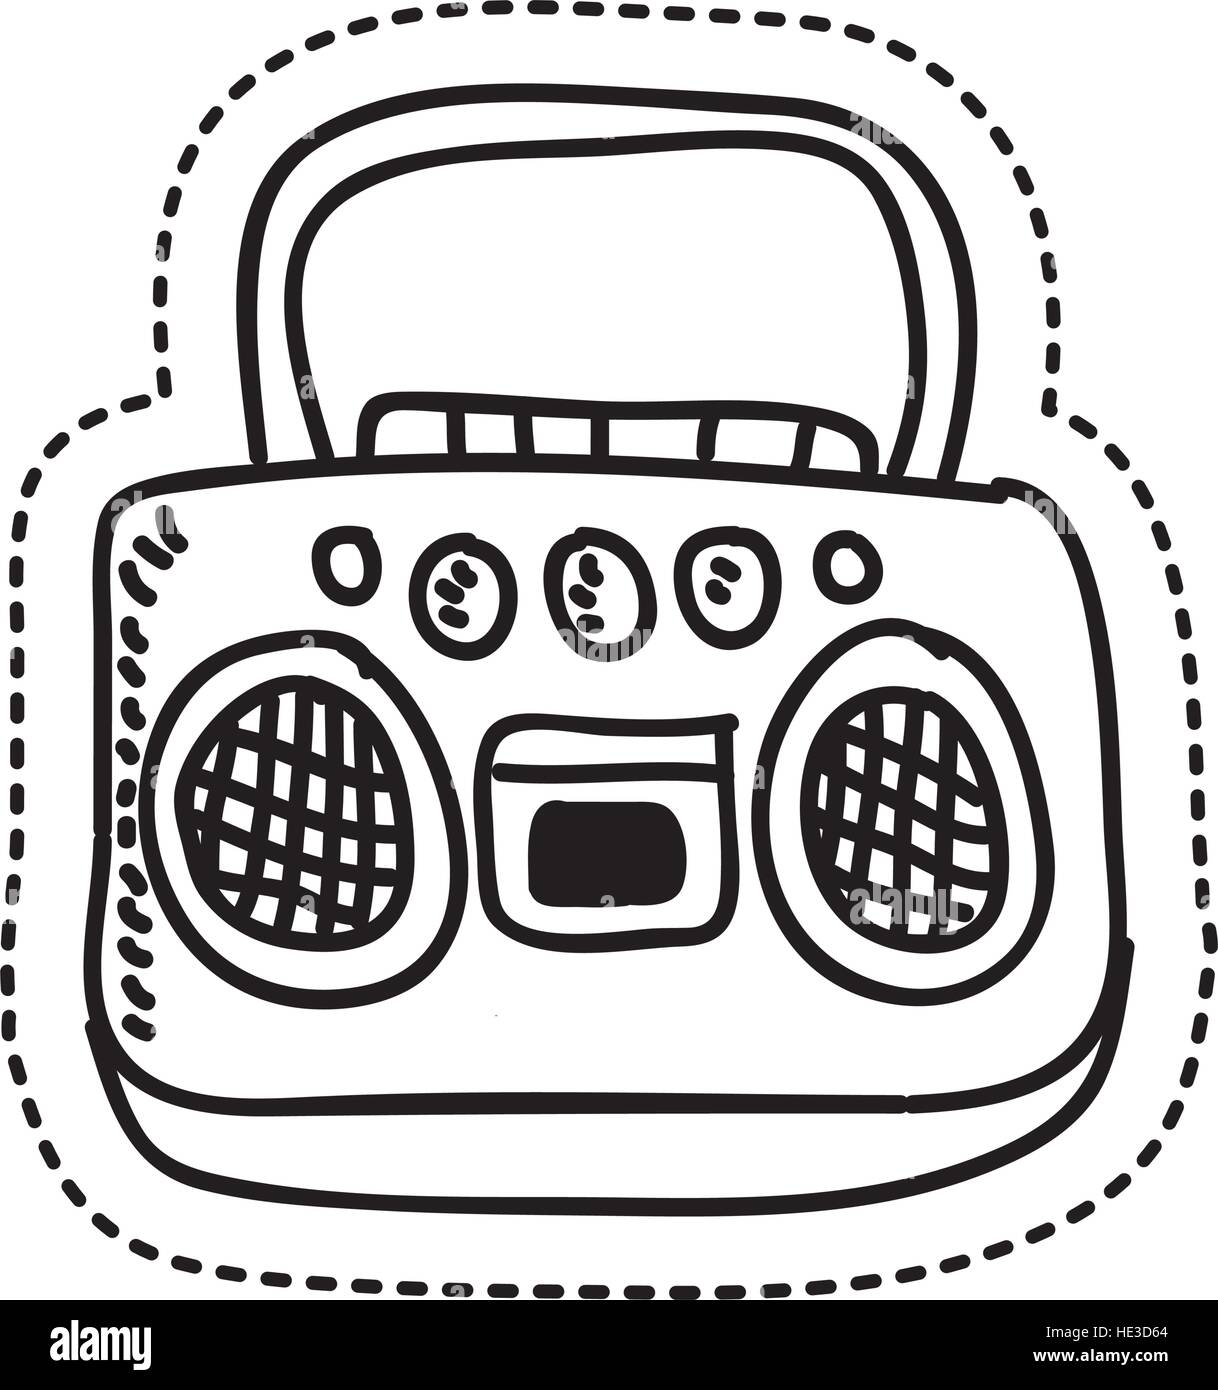 Boombox Drawing High Resolution Stock Photography And Images Alamy My first post, and here to draw on your knowledge and i build this boombox for my little sister because she likes to listen to dubstep. https www alamy com stock photo radio retro style drawing vector illustration design 129153980 html